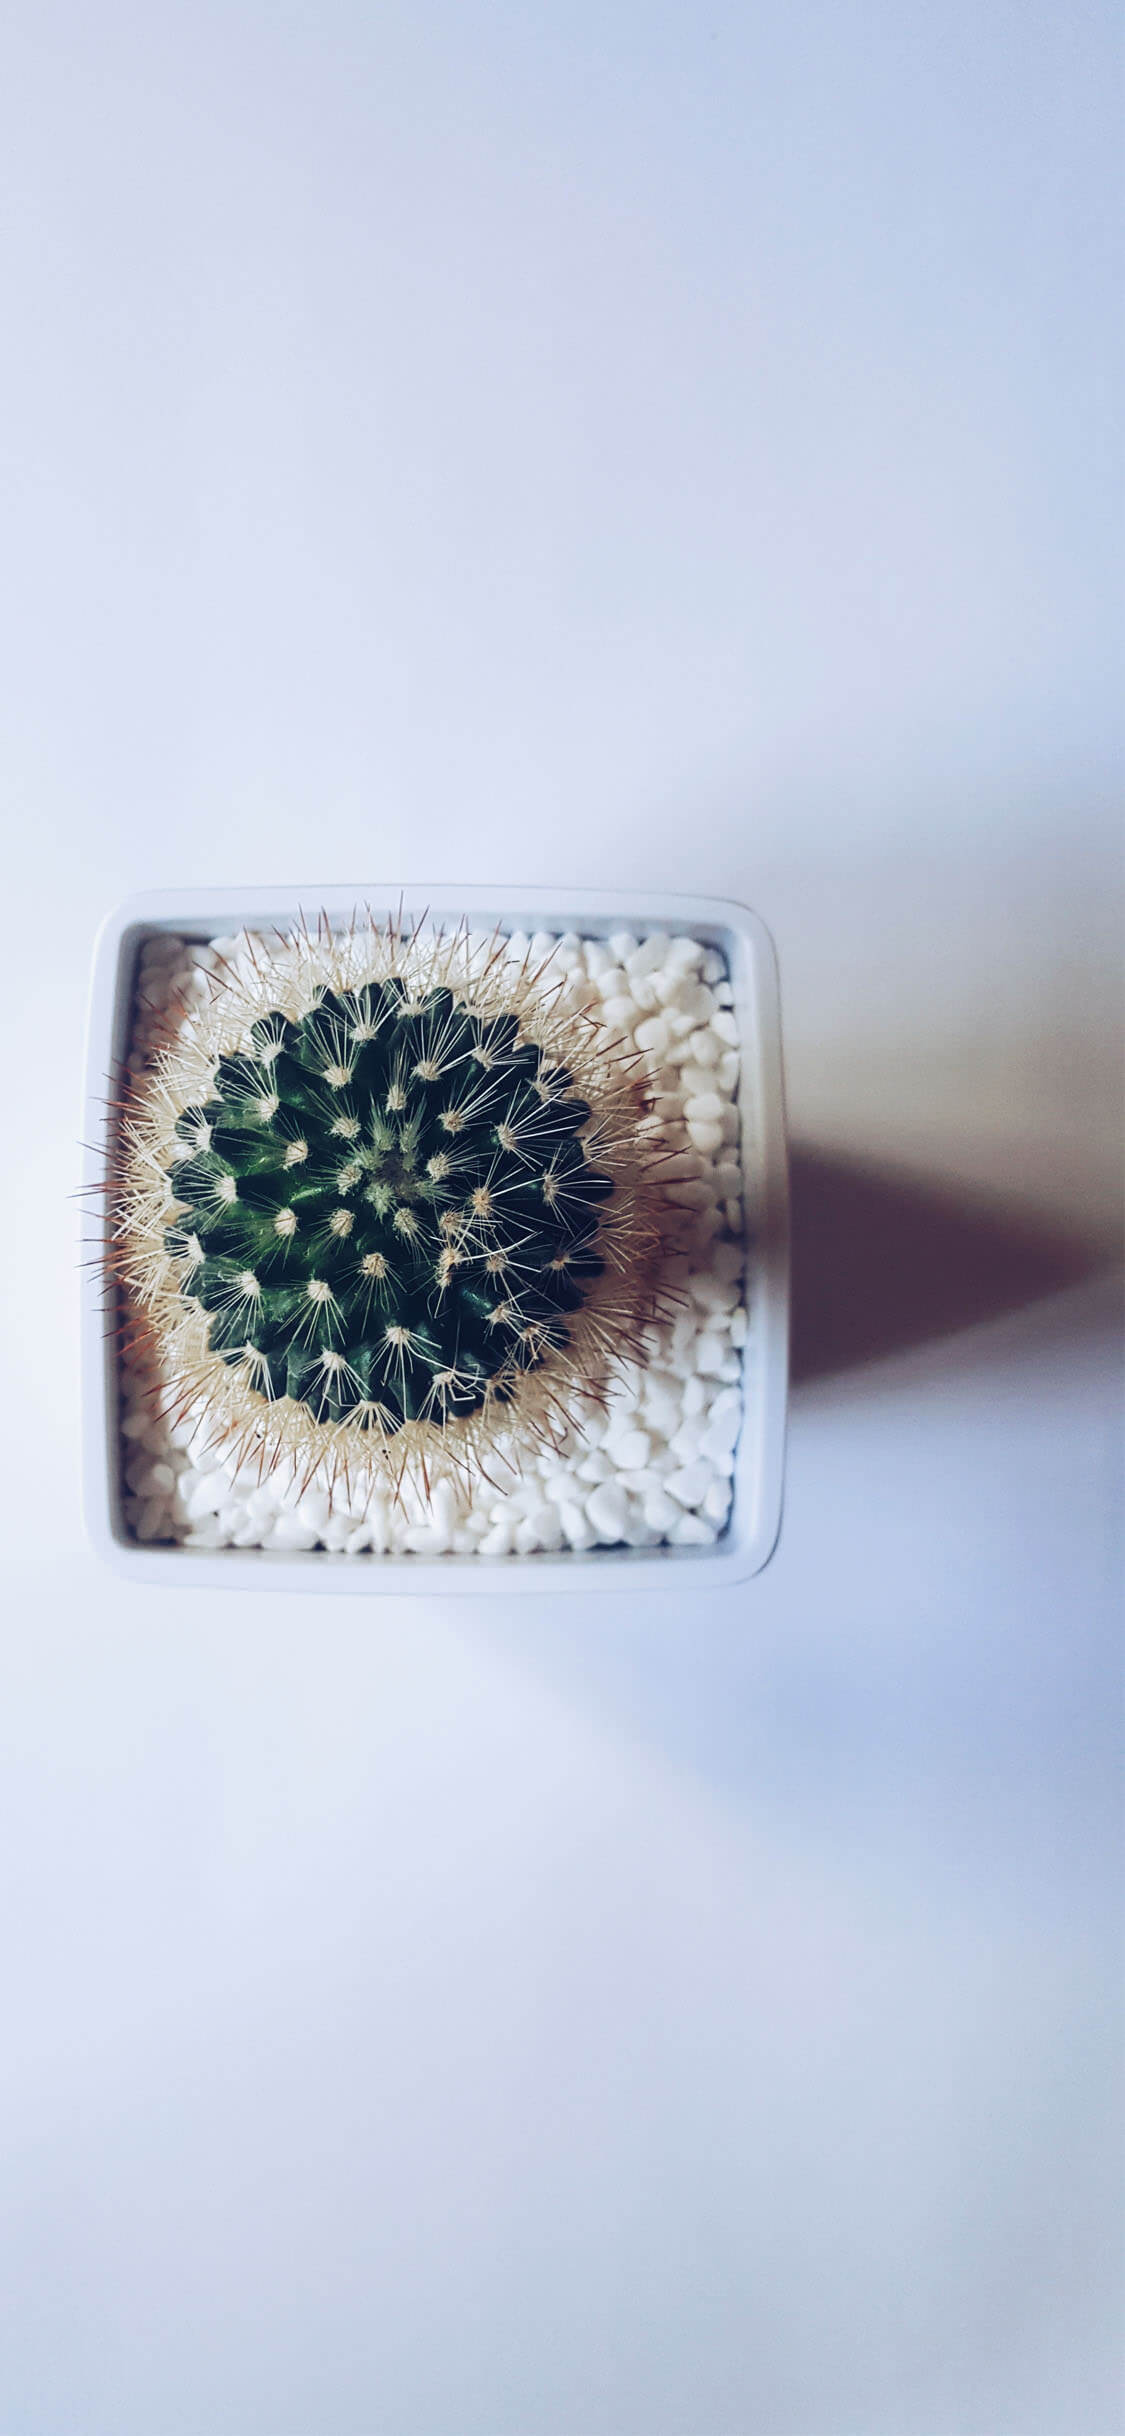 A cactus sitting in some white rice - Photography